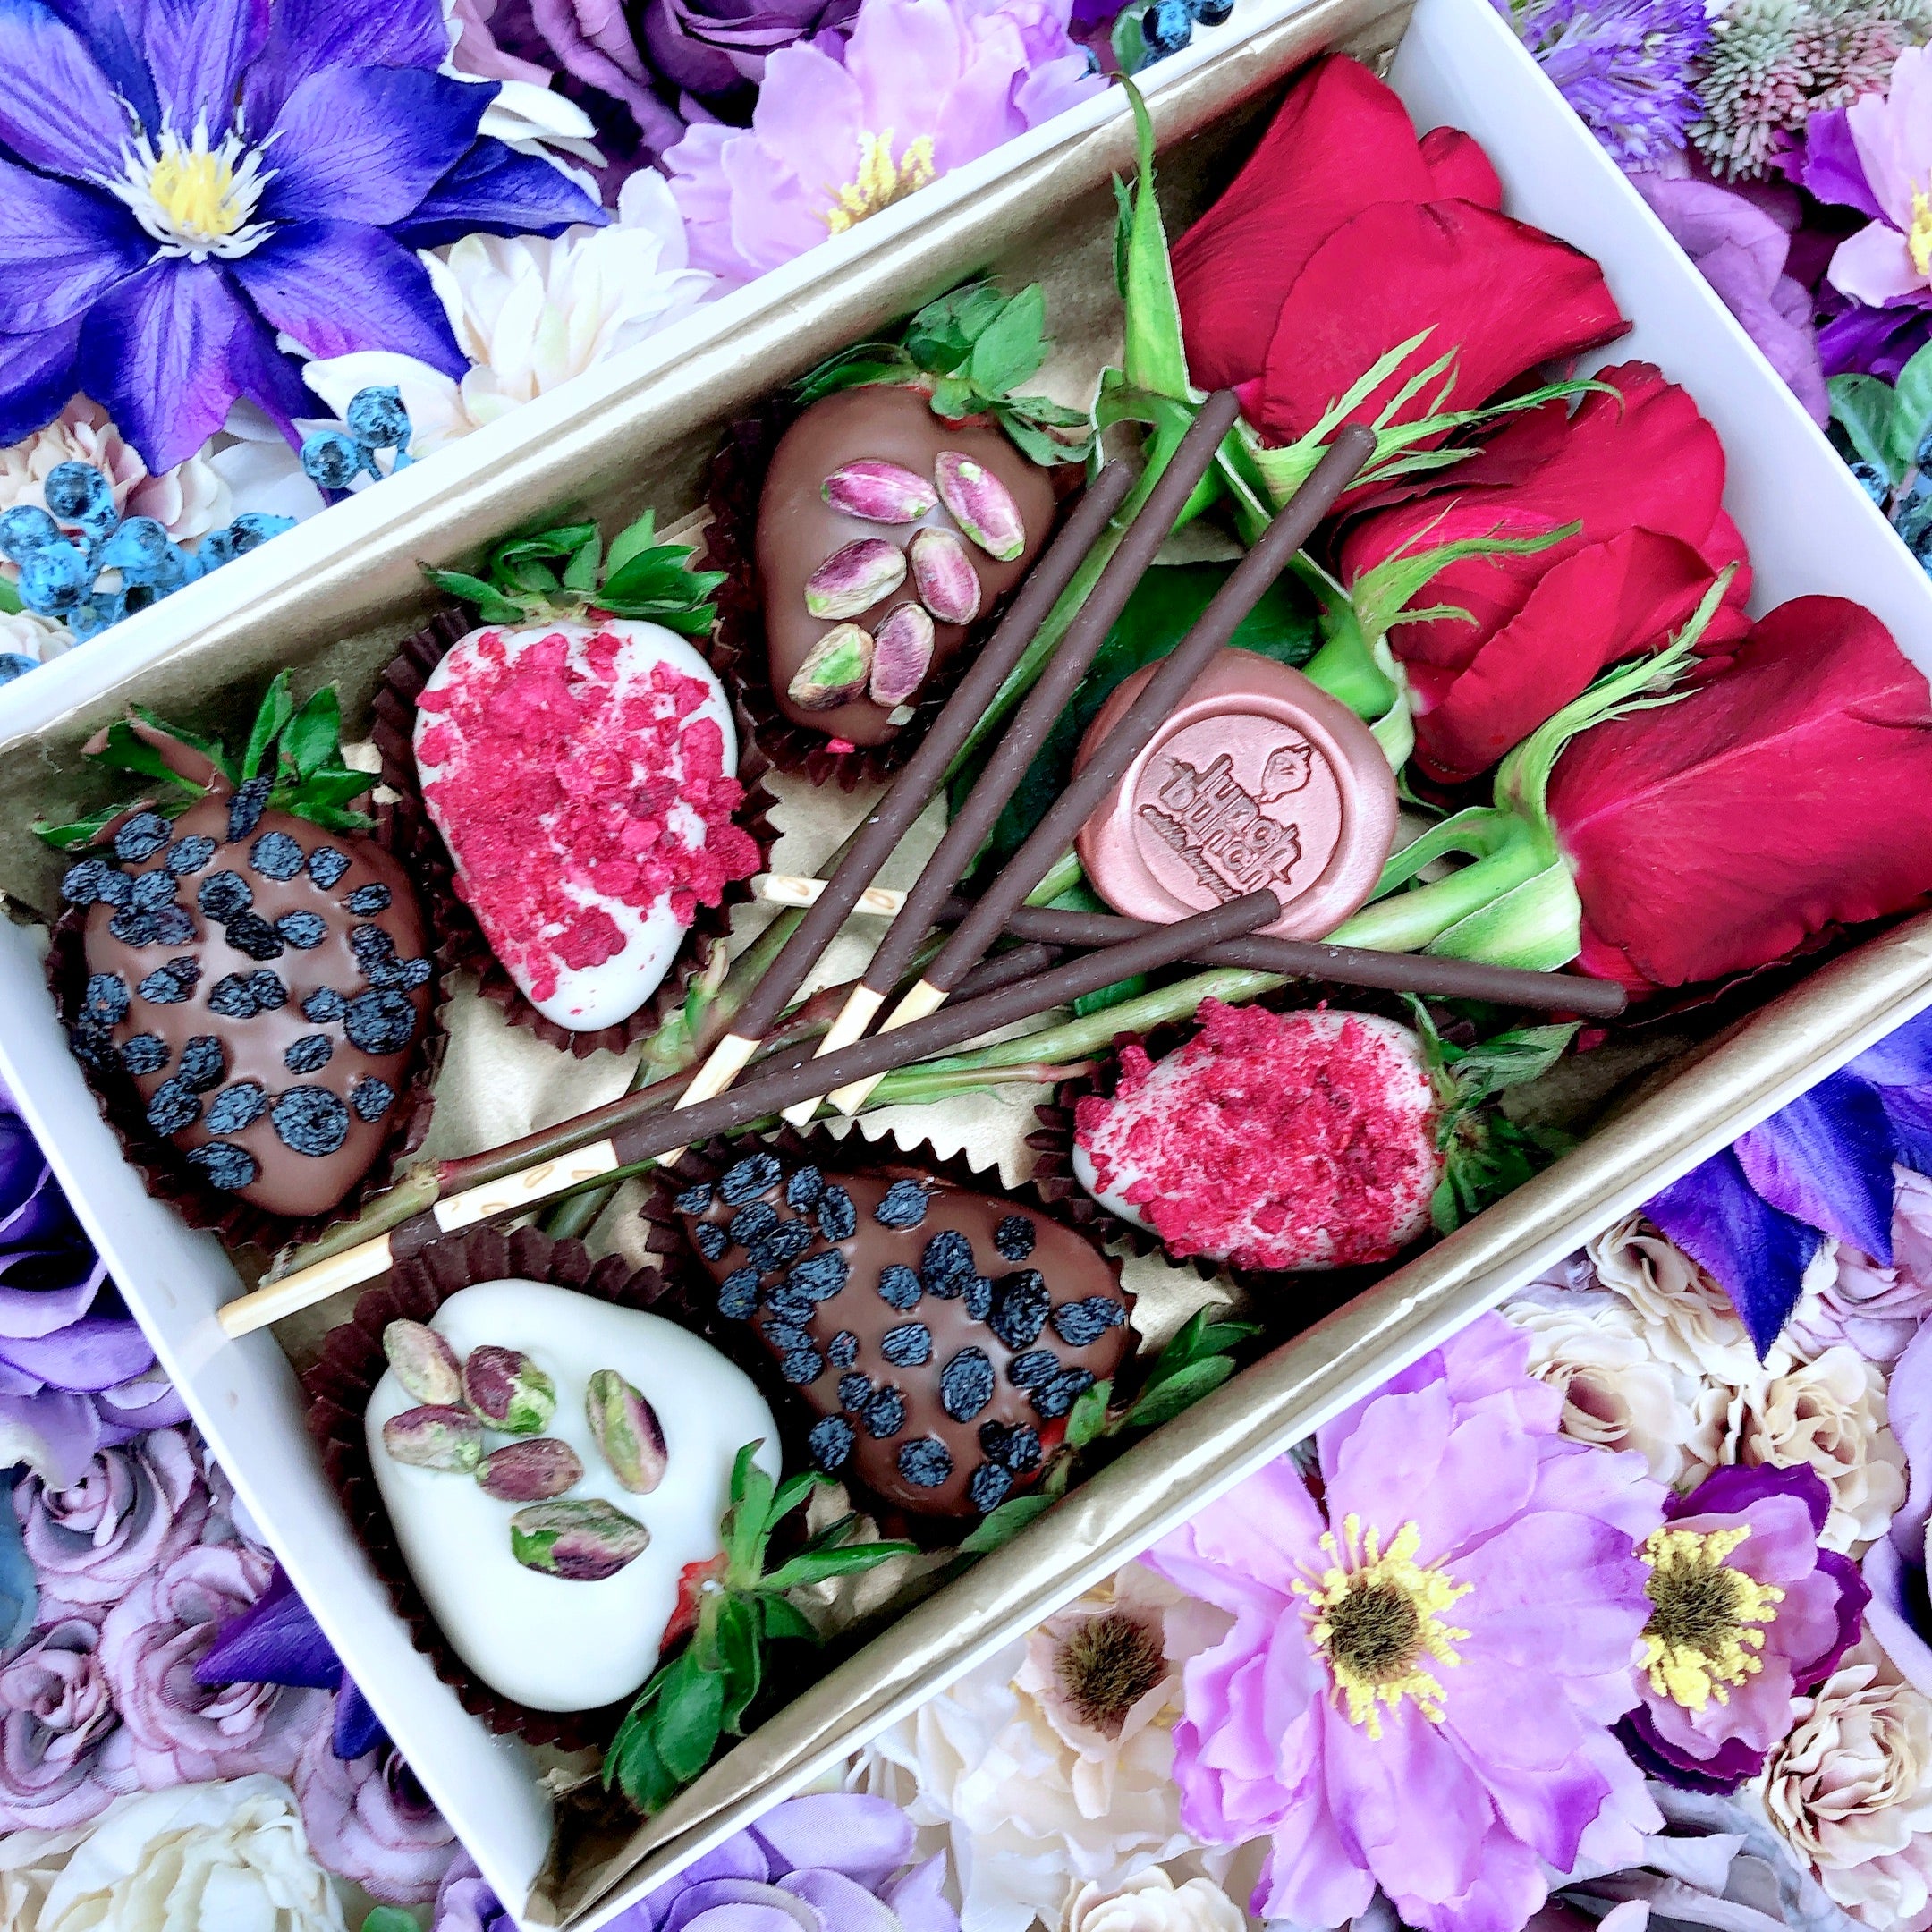 Chocolate decorated strawberries and red roses in a gift box